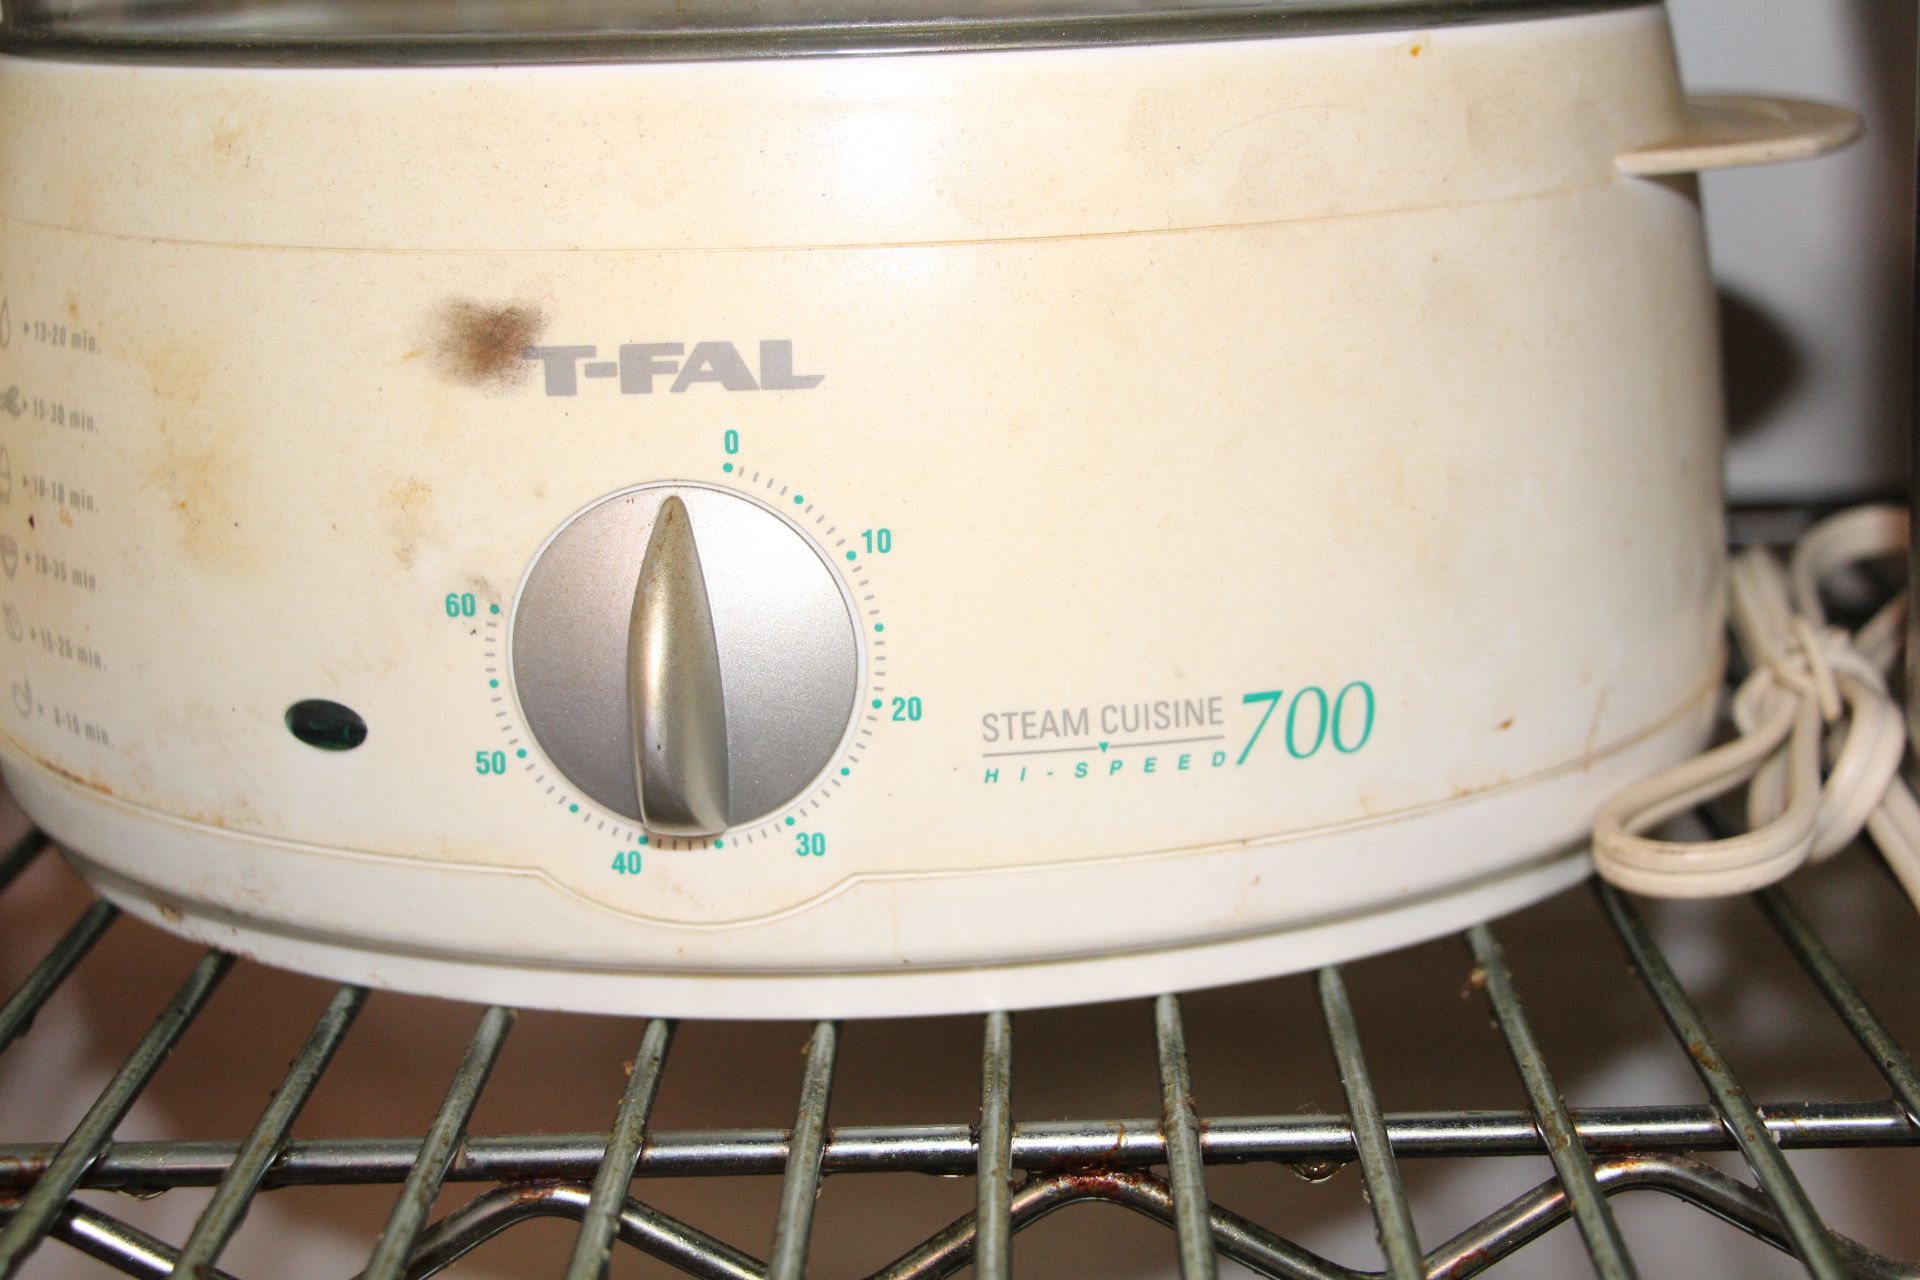 T-Fal Steam cuisine 700 - Image 2 of 2